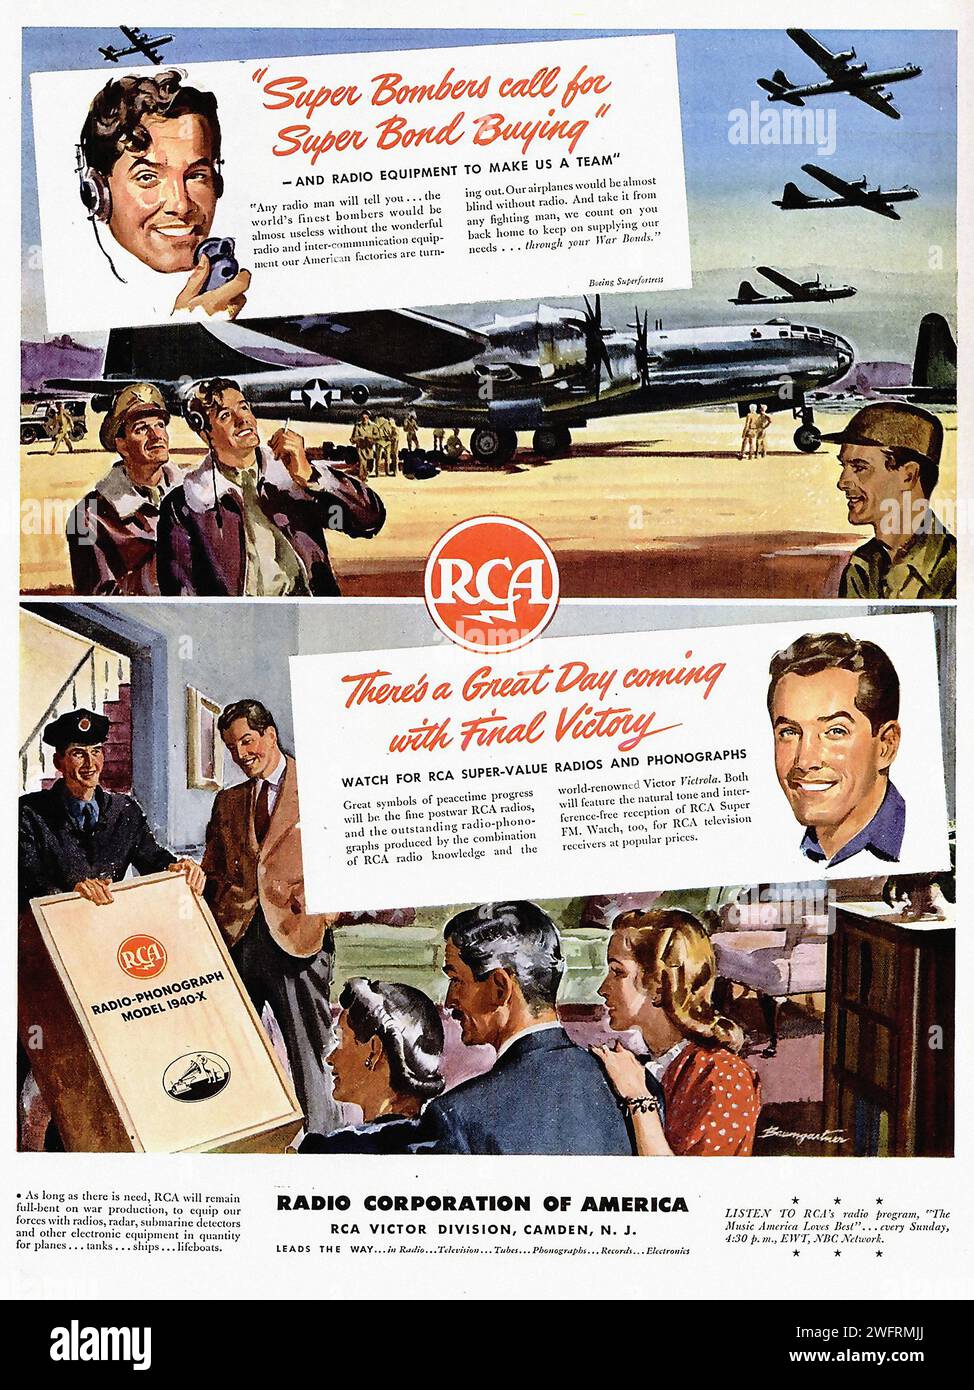 “Super Bombers call for Super Bombardiers” “There’s a Great Day coming with final Victory” “RADIO CORPORATION OF AMERICA” “RCA VICTOR DIVISION, CAMDEN, N.J.”  A vintage U.S propaganda poster from the second world war. The poster is in a realistic style with a color palette of blue, brown, and red. It is divided into two sections, the top section shows a bomber plane flying over a landscape against a blue sky background, and the bottom section shows a family gathered around a radio with a man holding a newspaper with the headline “RADIO PROGRESS”. - American (U.S.) advertising, World War II era Stock Photo